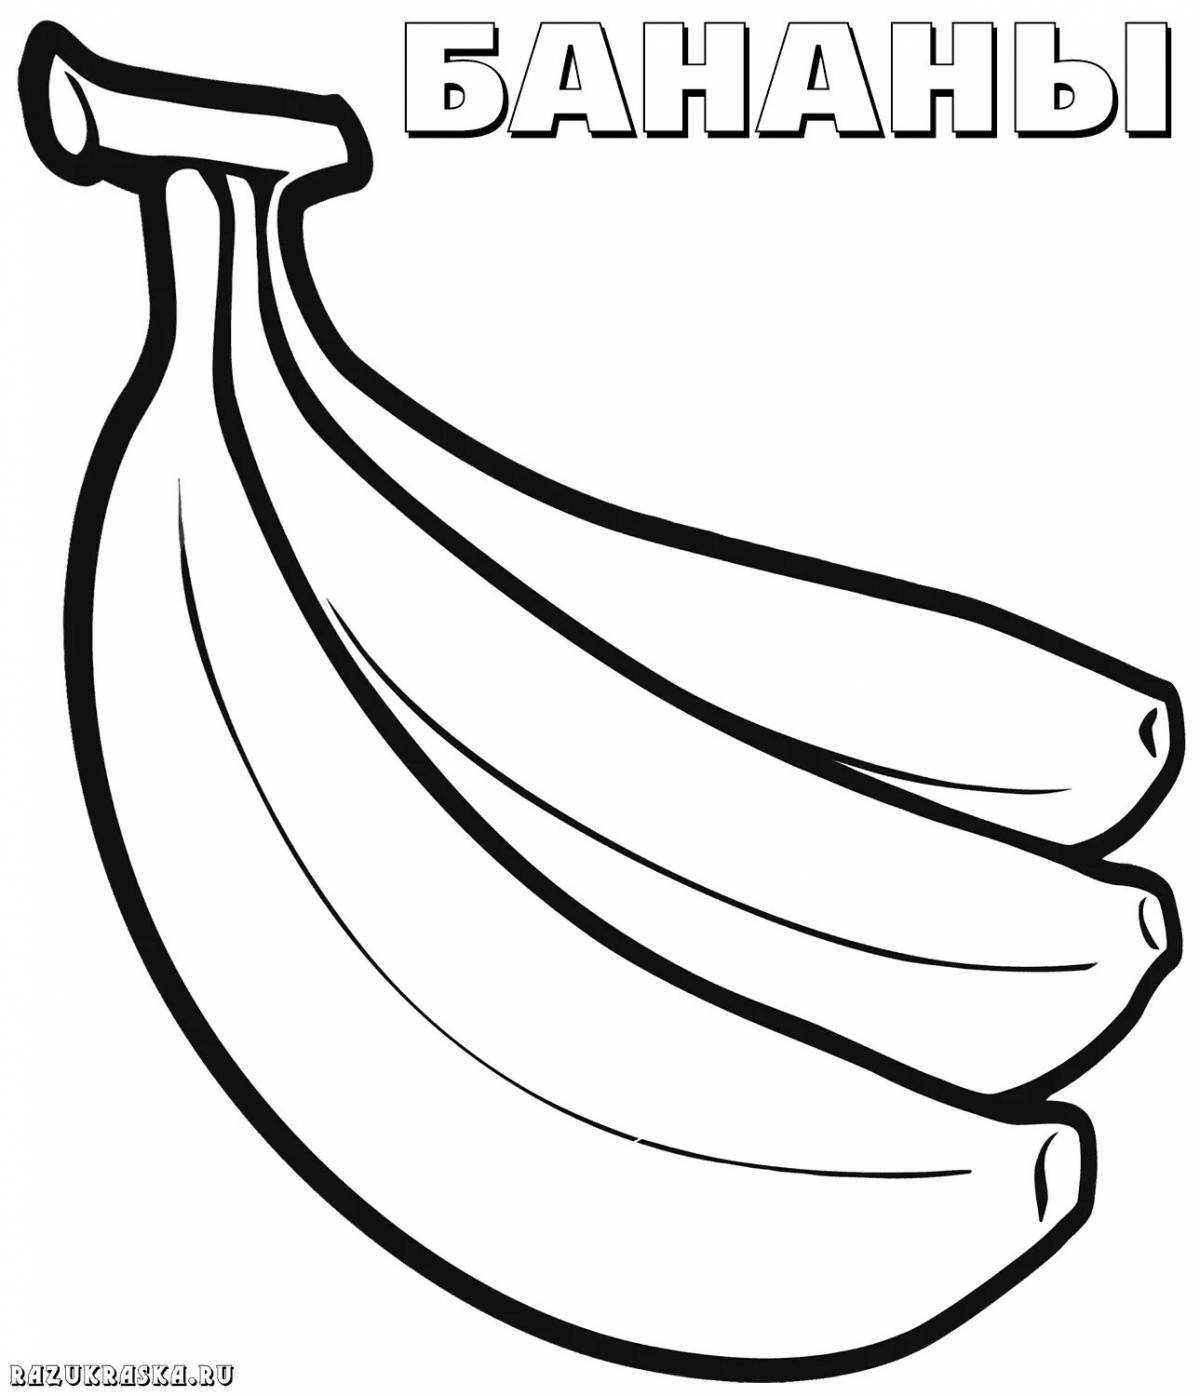 Creative banana coloring book for 3-4 year olds